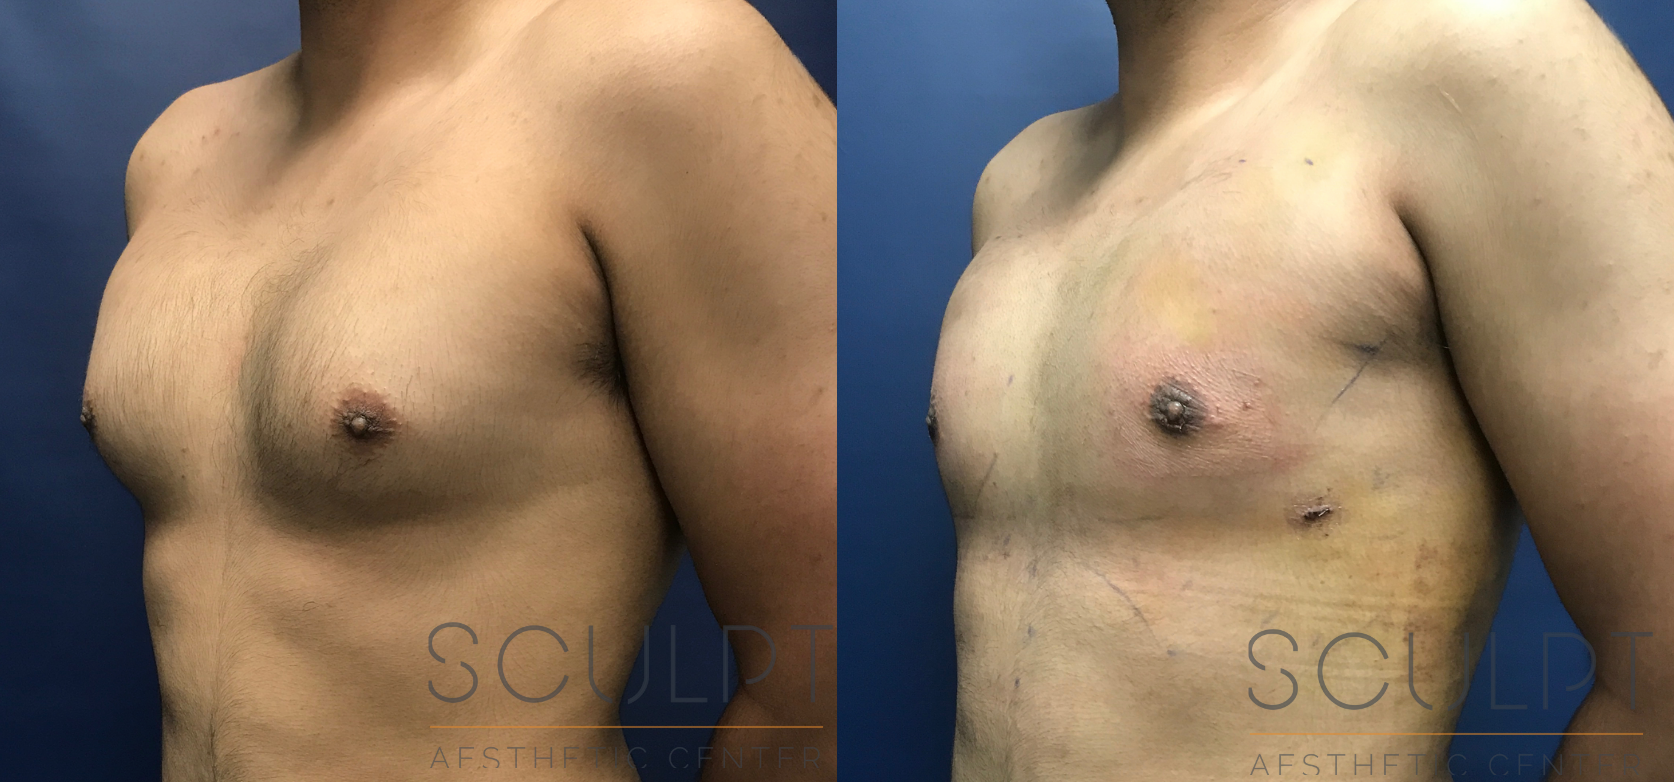 Gynecomastia Excision with Chest SCULPTing Before and After Photo by Sculpt Aesthetic Center in Frisco, TX